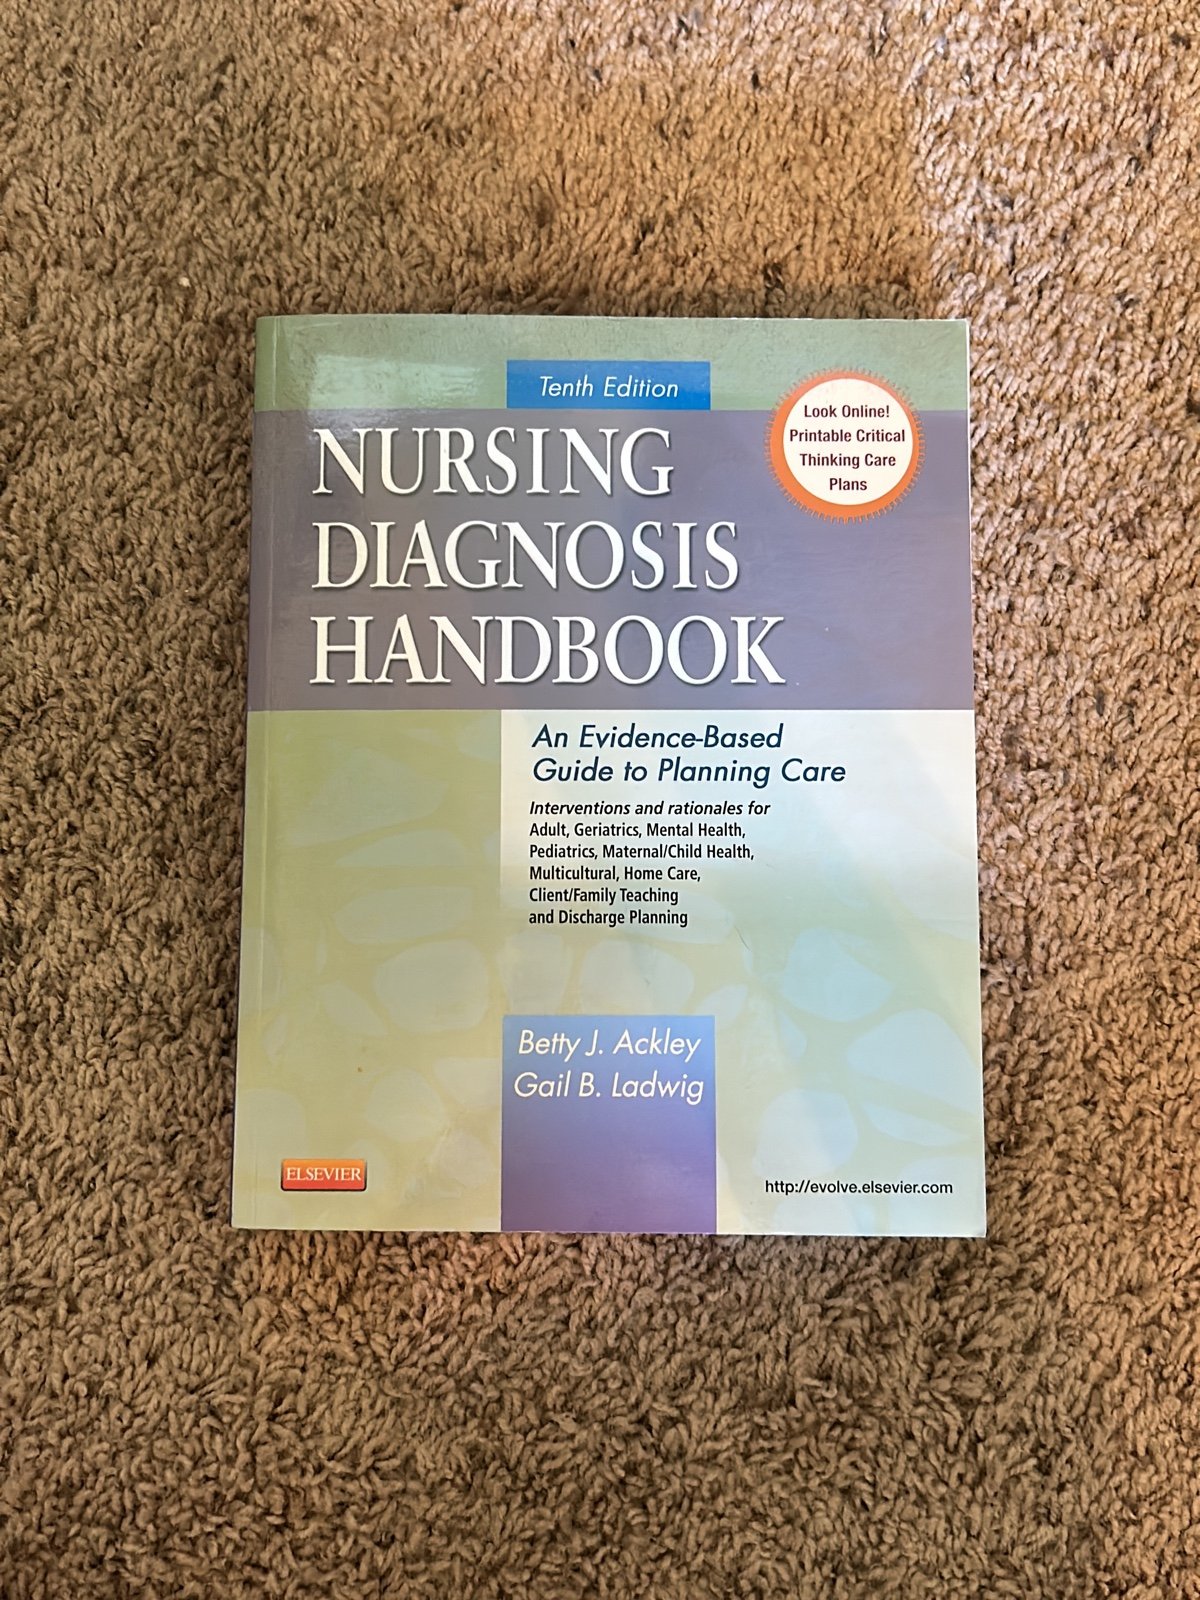 Nursing Diagnosis Handbook: An Evidence-Based Guide to Planning Care 10th hbwr1lqqJ